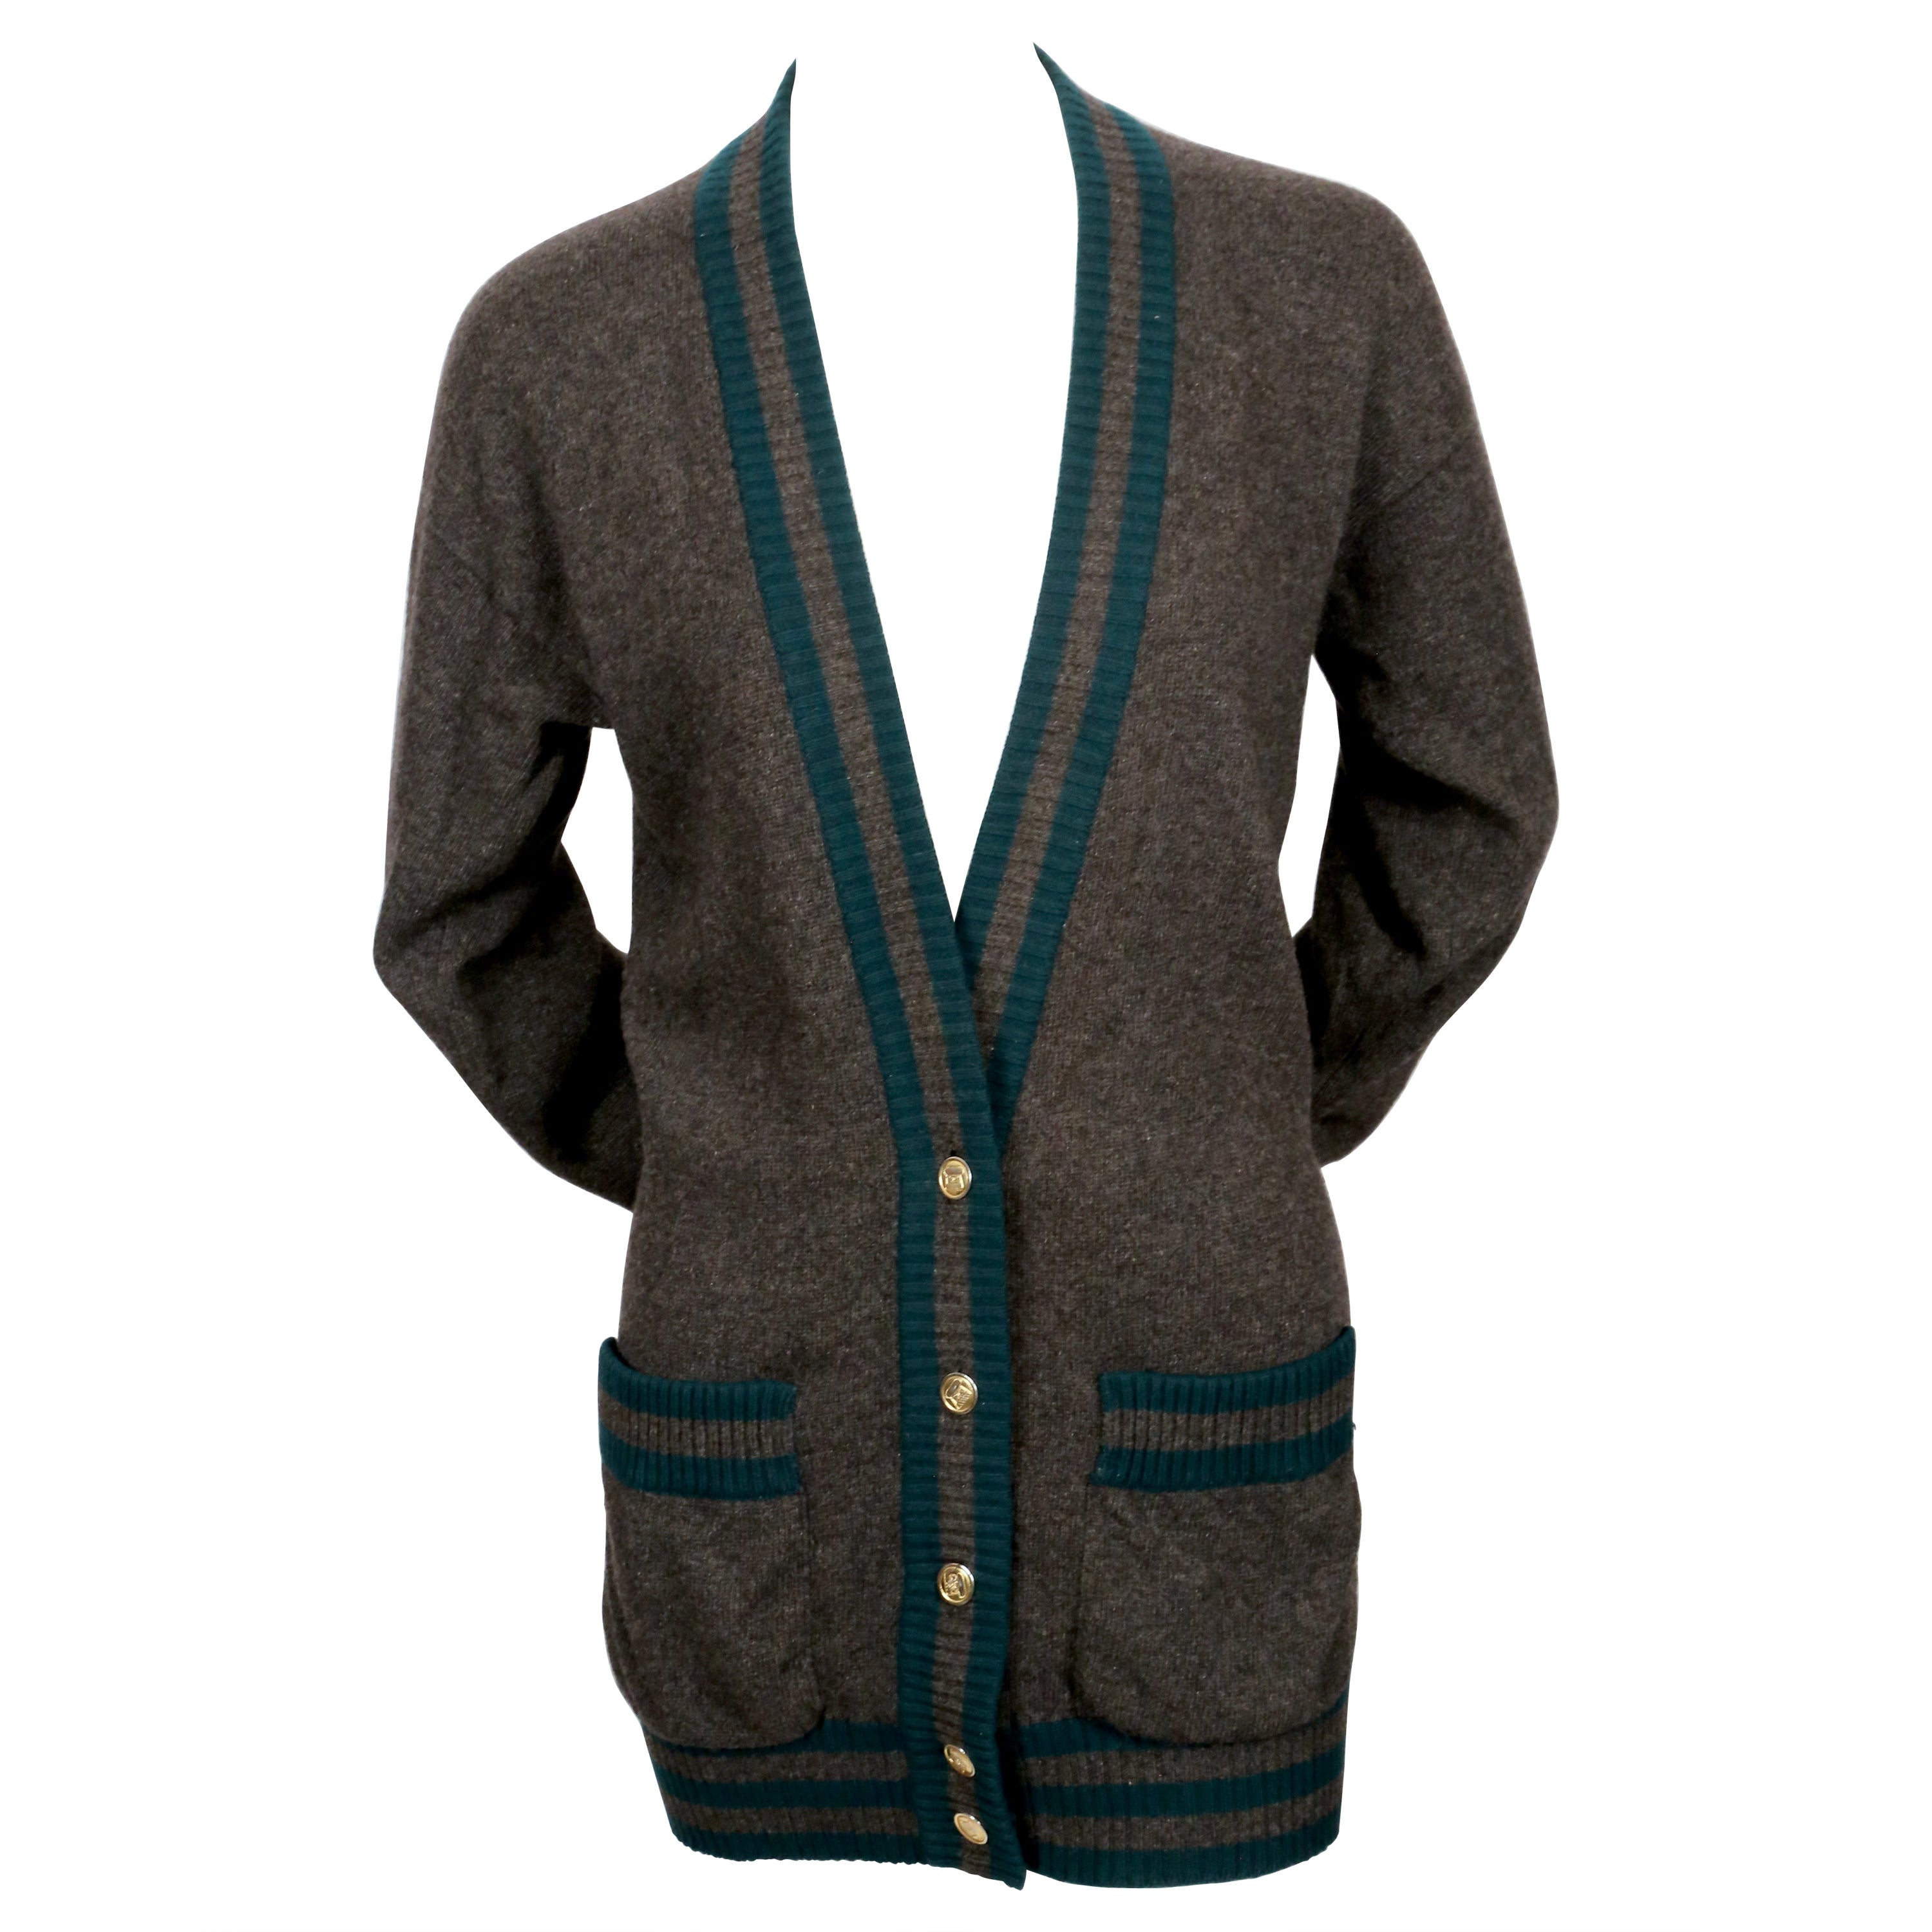 1980's CHANEL charcoal grey and spruce green cashmere cardigan sweater For Sale